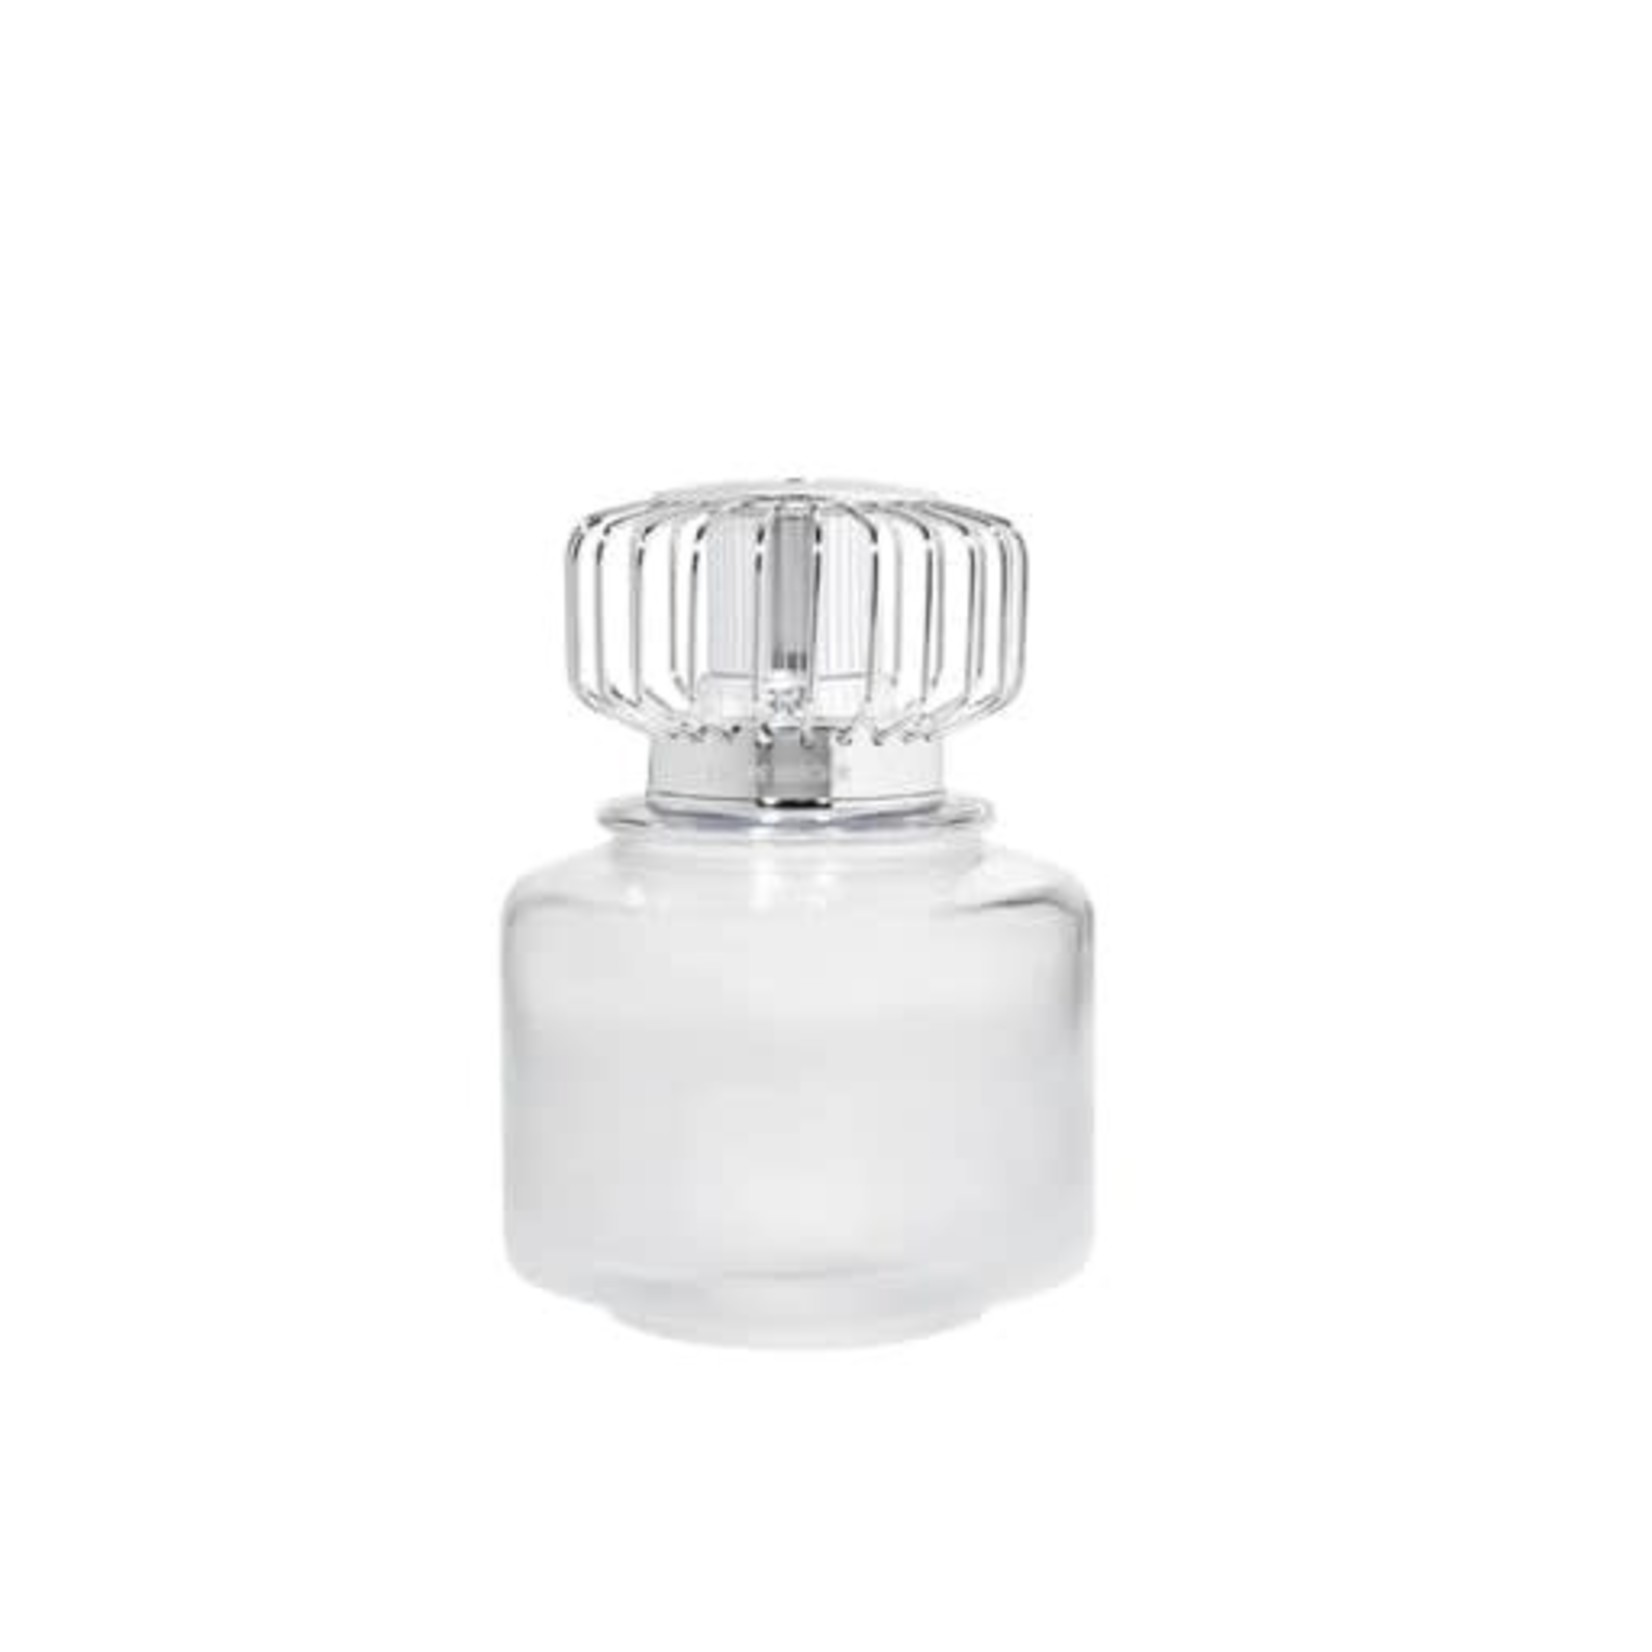 MAISON BERGER MAISON BERGER Land Lampe - Frosted White DNR